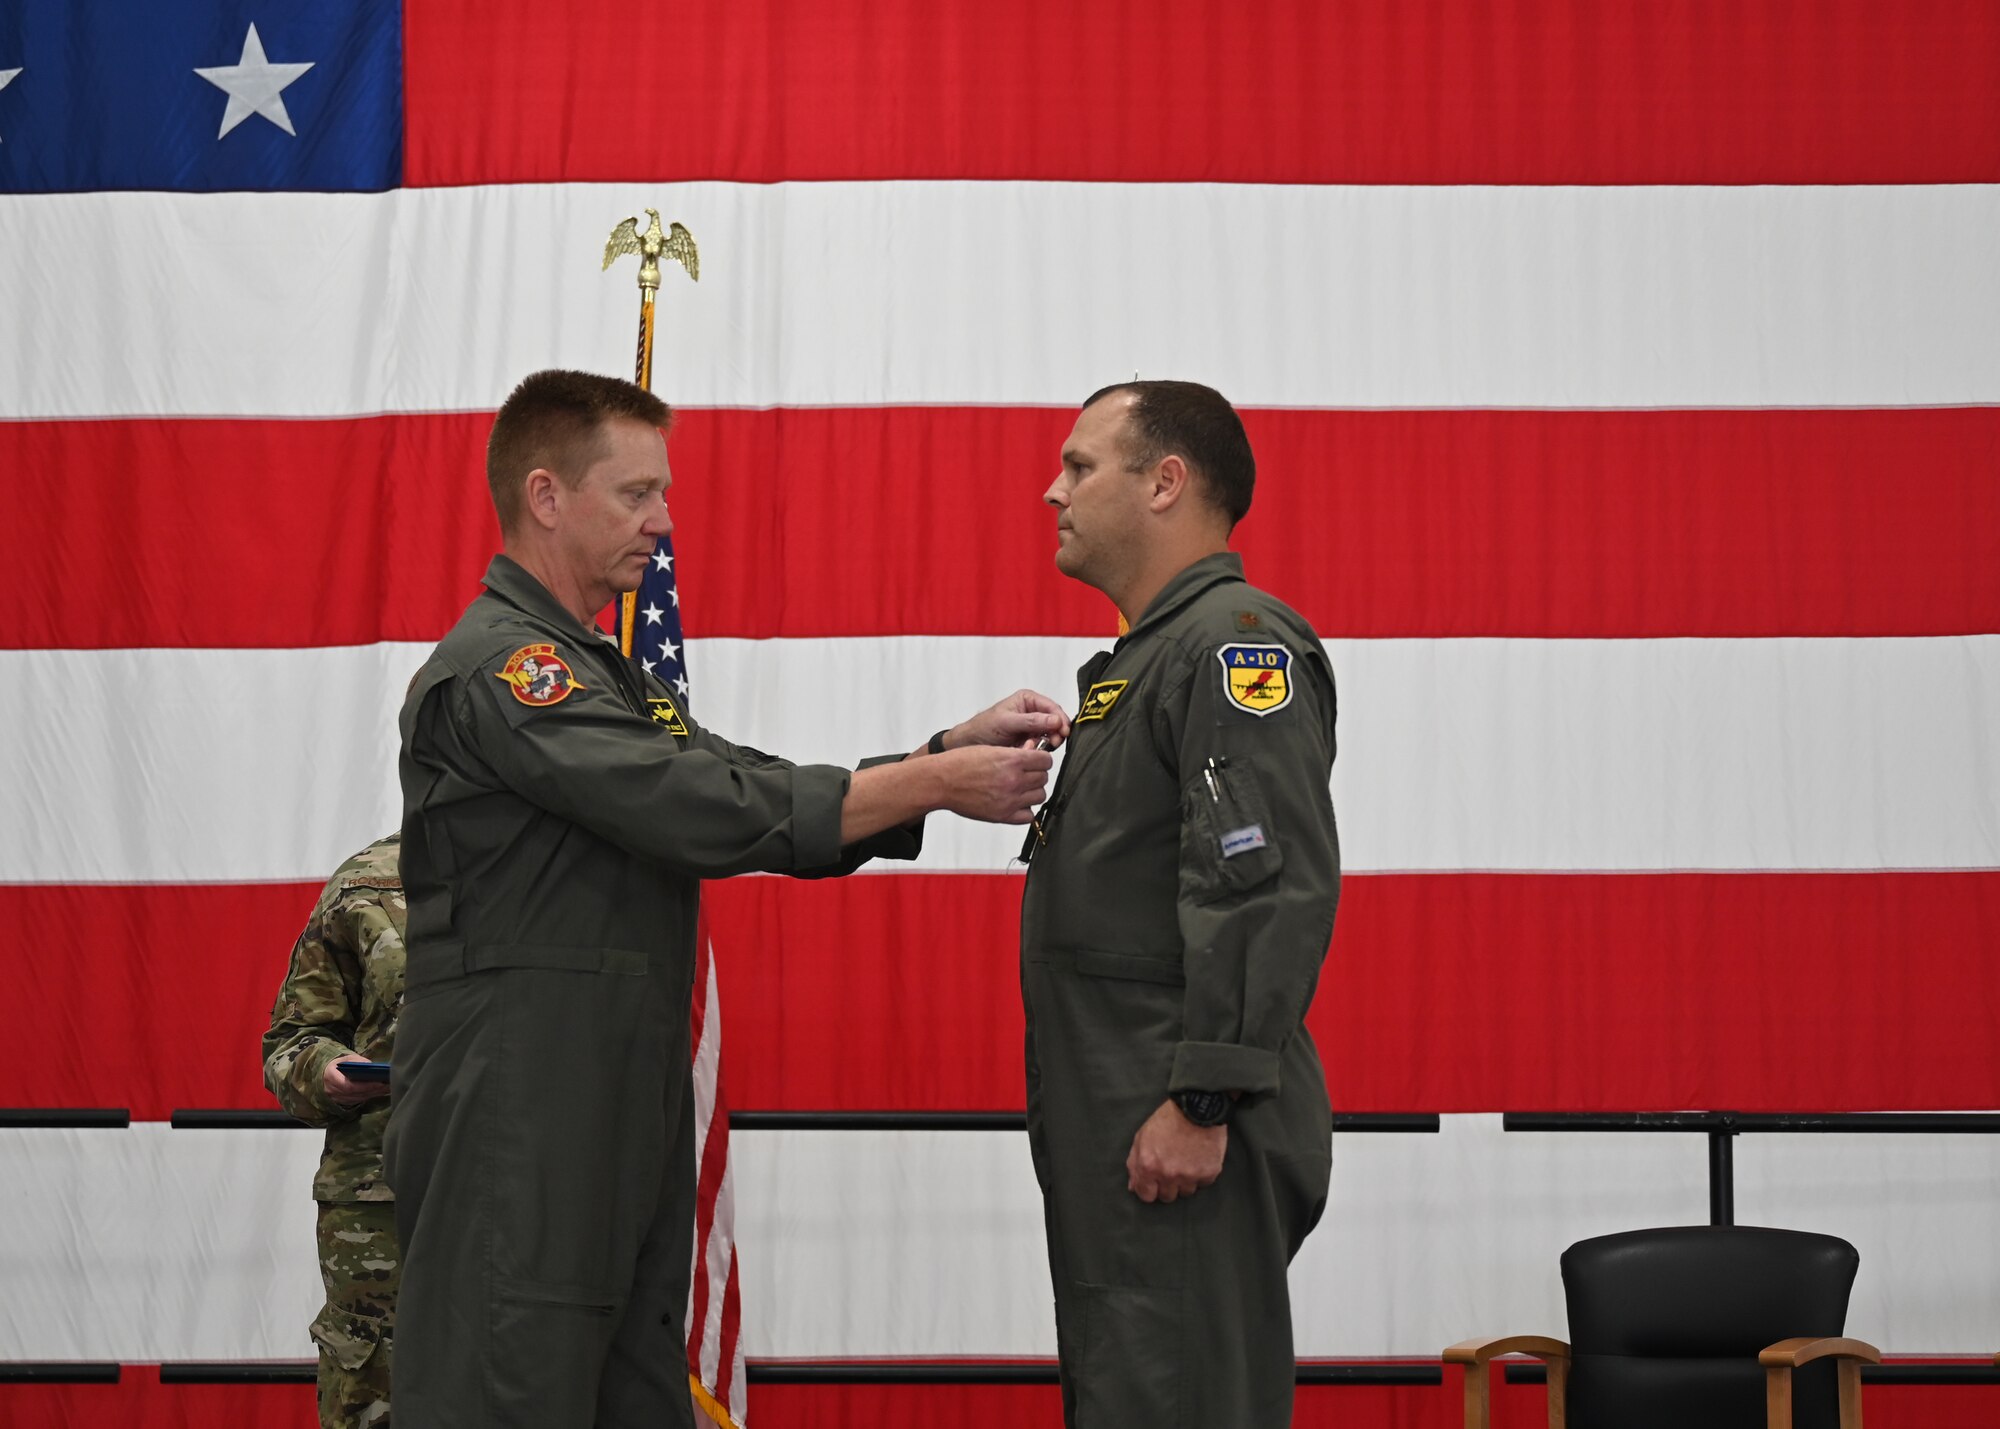 A man pins a medal to the chest of another man in front of a large American flag.